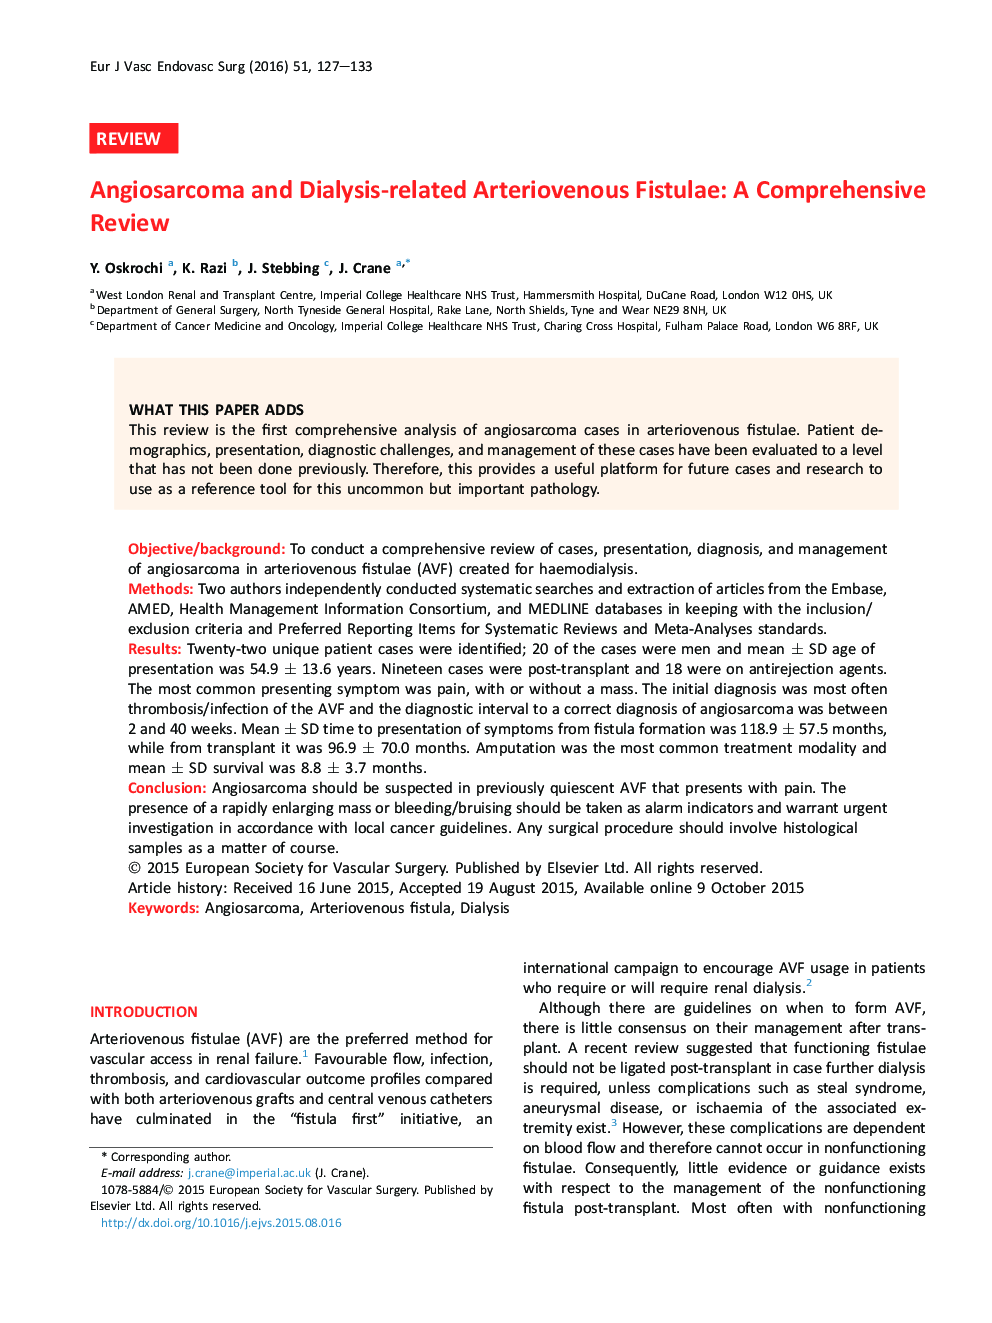 Angiosarcoma and Dialysis-related Arteriovenous Fistulae: A Comprehensive Review